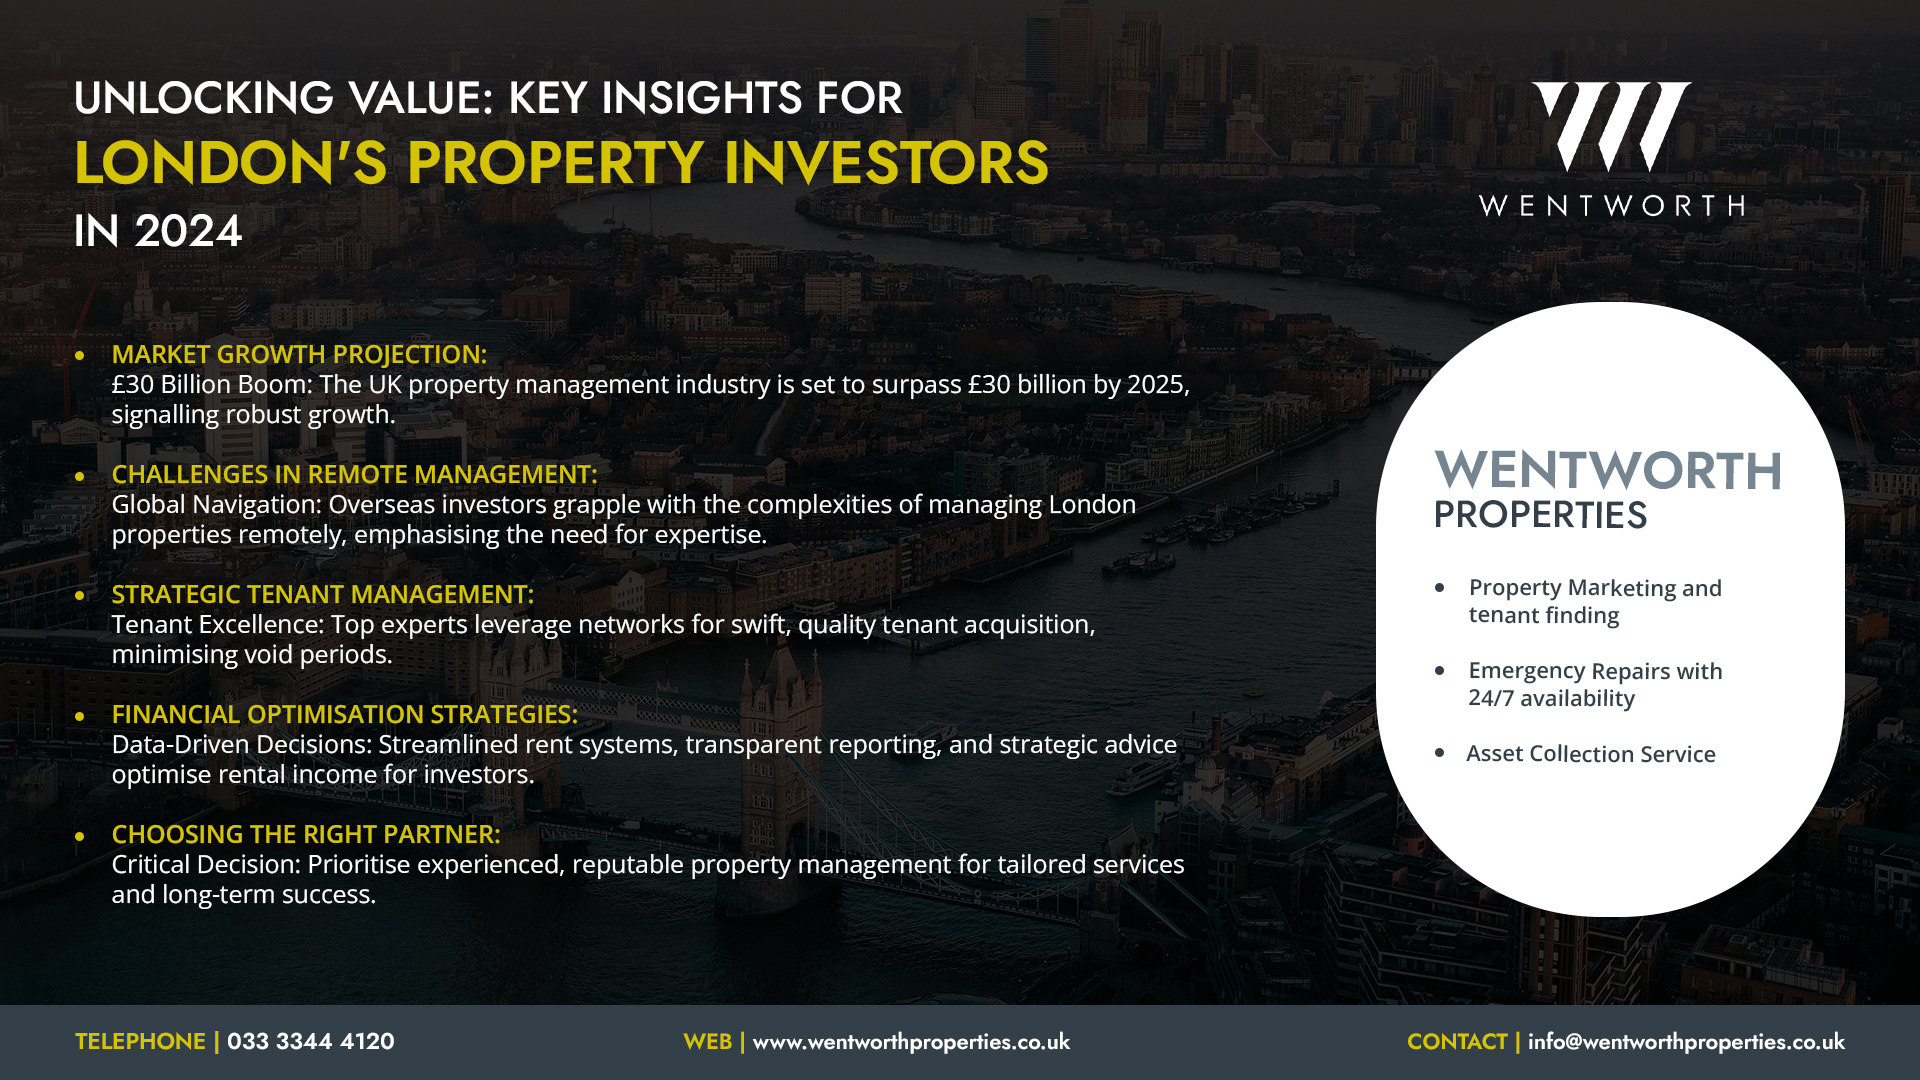 Information about property management experts in London